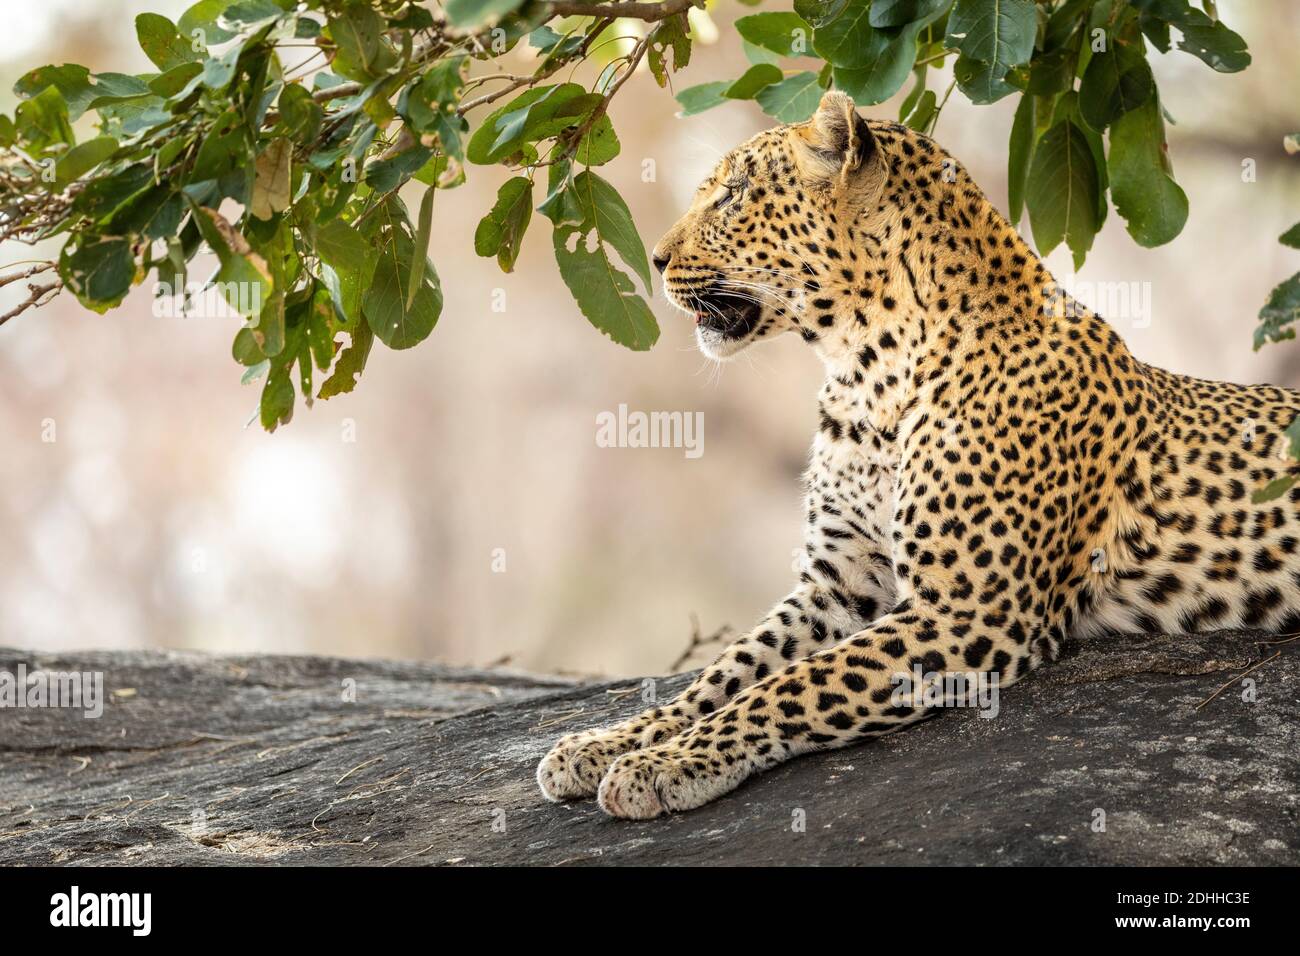 Adult leopard sitting on a large rock looking alert in Kruger Park in South Africa Stock Photo